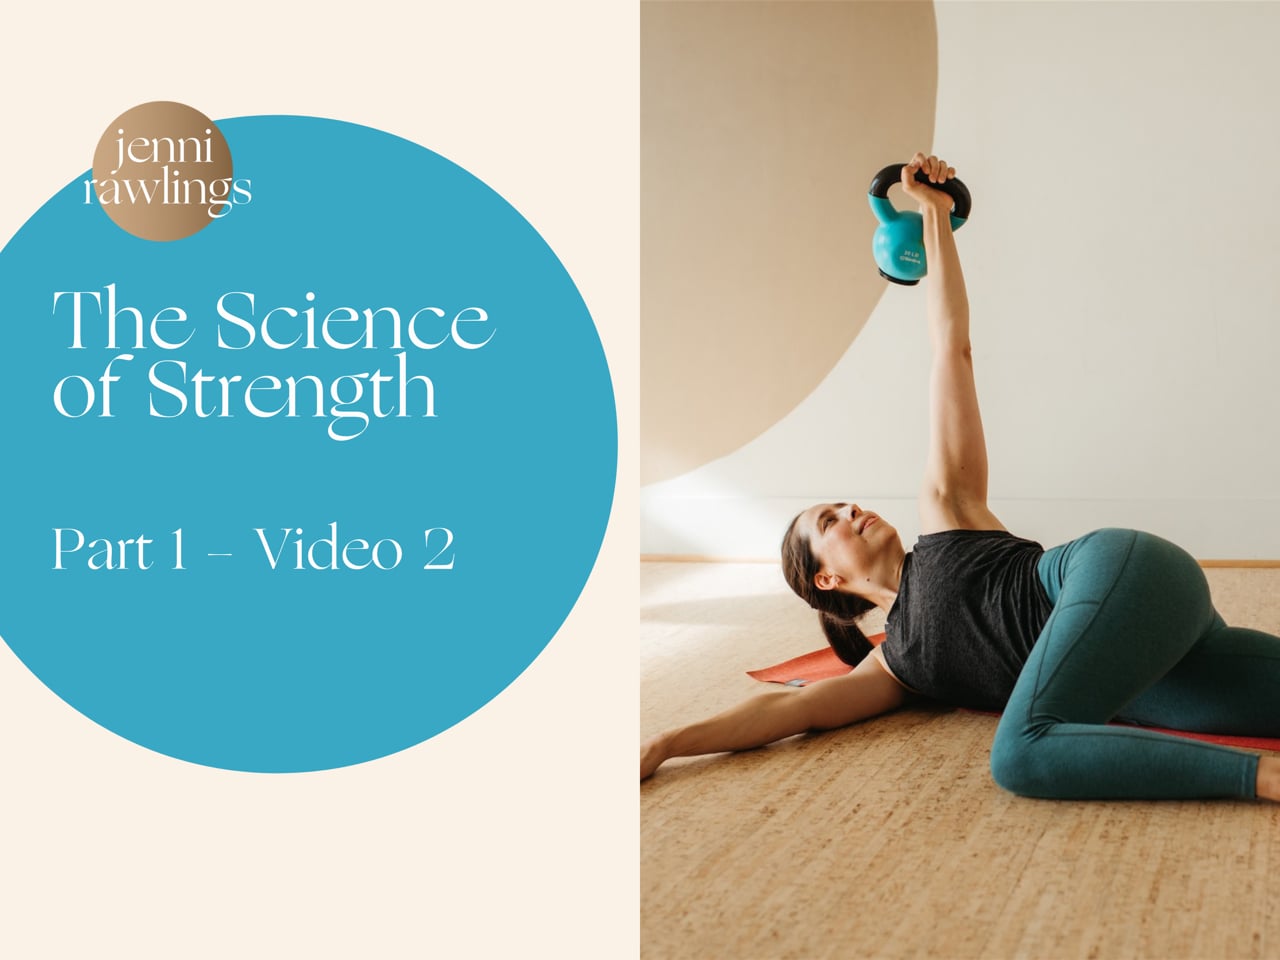 The Science of Strength Part 1, Video 2